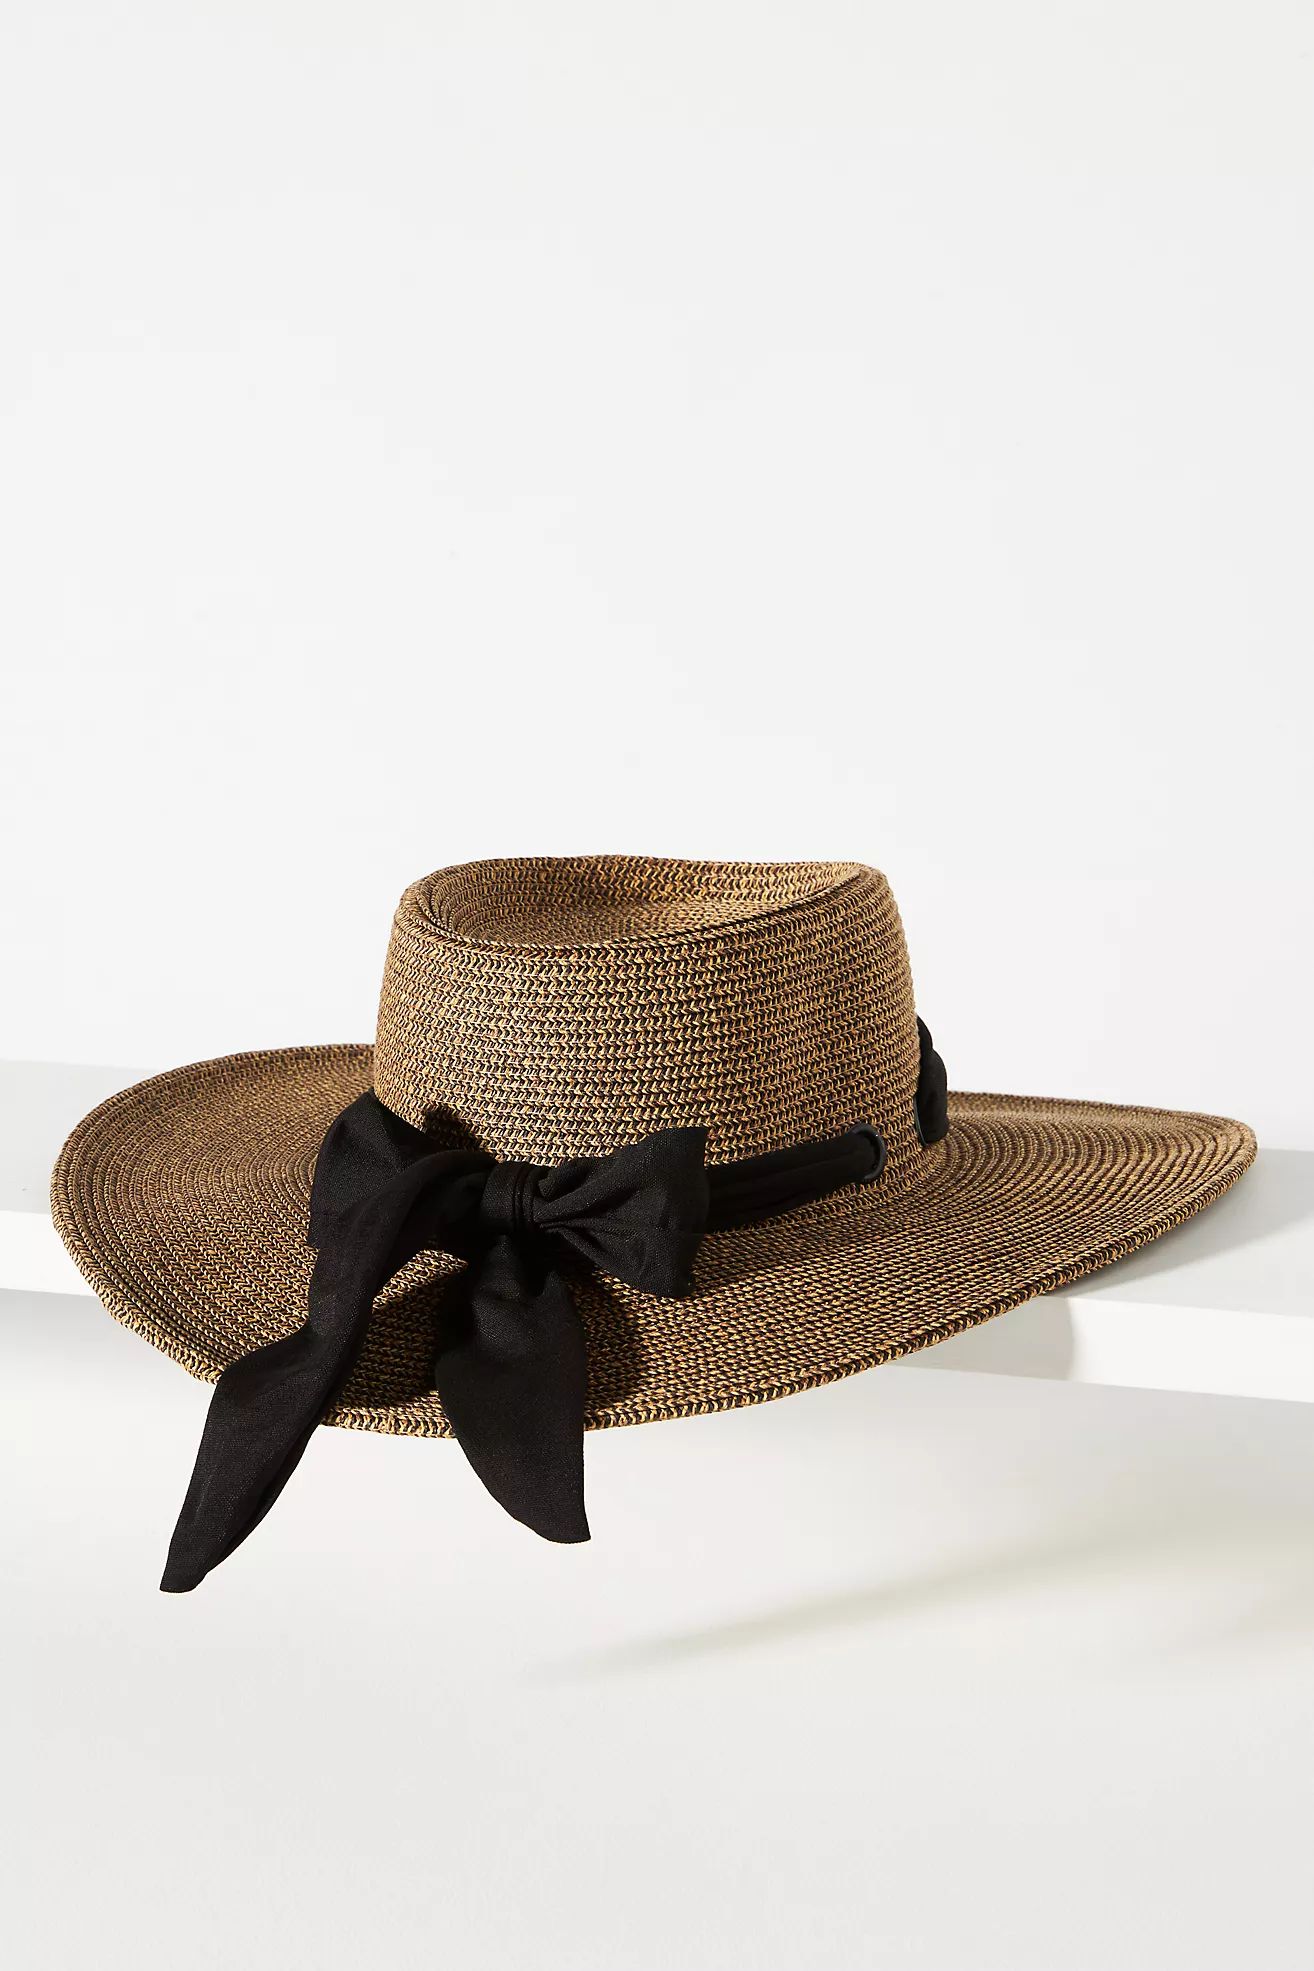 San Diego Hat Co. Scarf Boater | Anthropologie (US)